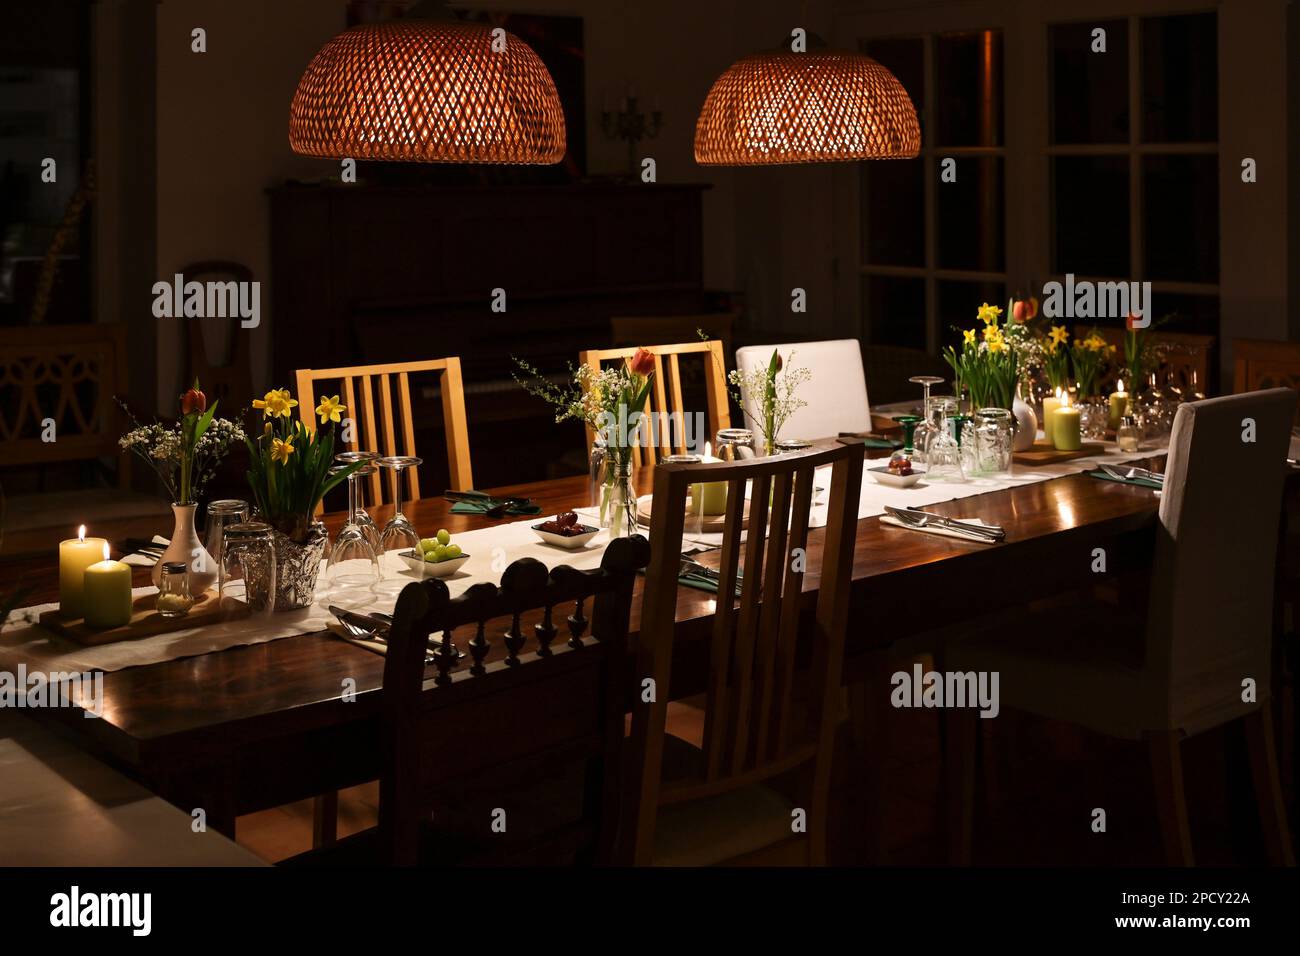 Large dining table at night decorated for a casual dinner party with family and friends with candles, spring flowers, drinking glasses and different c Stock Photo